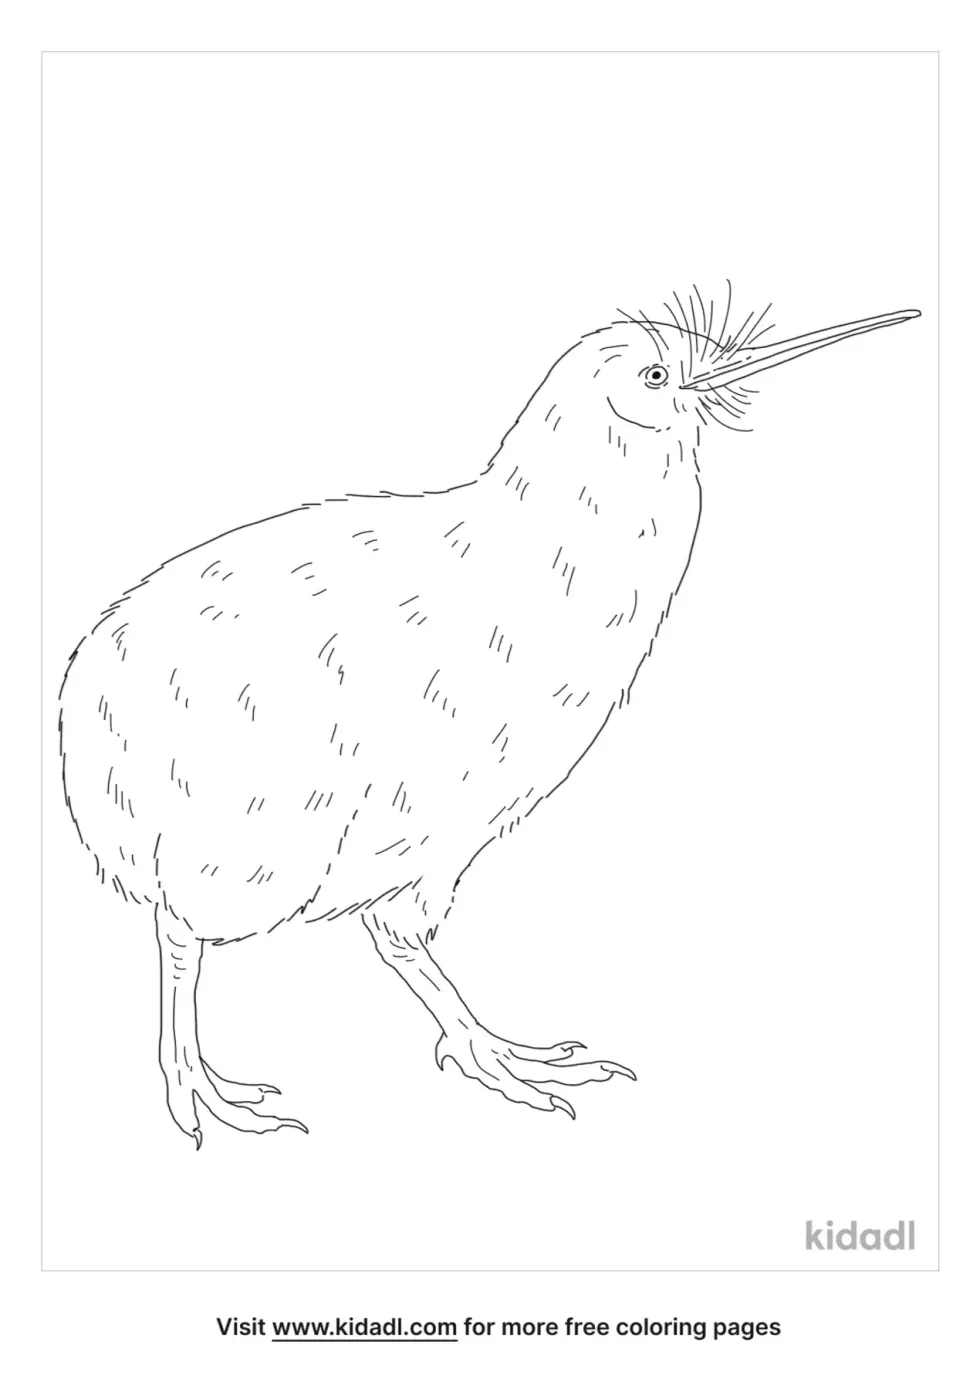 Great Spotted Kiwi Coloring Page